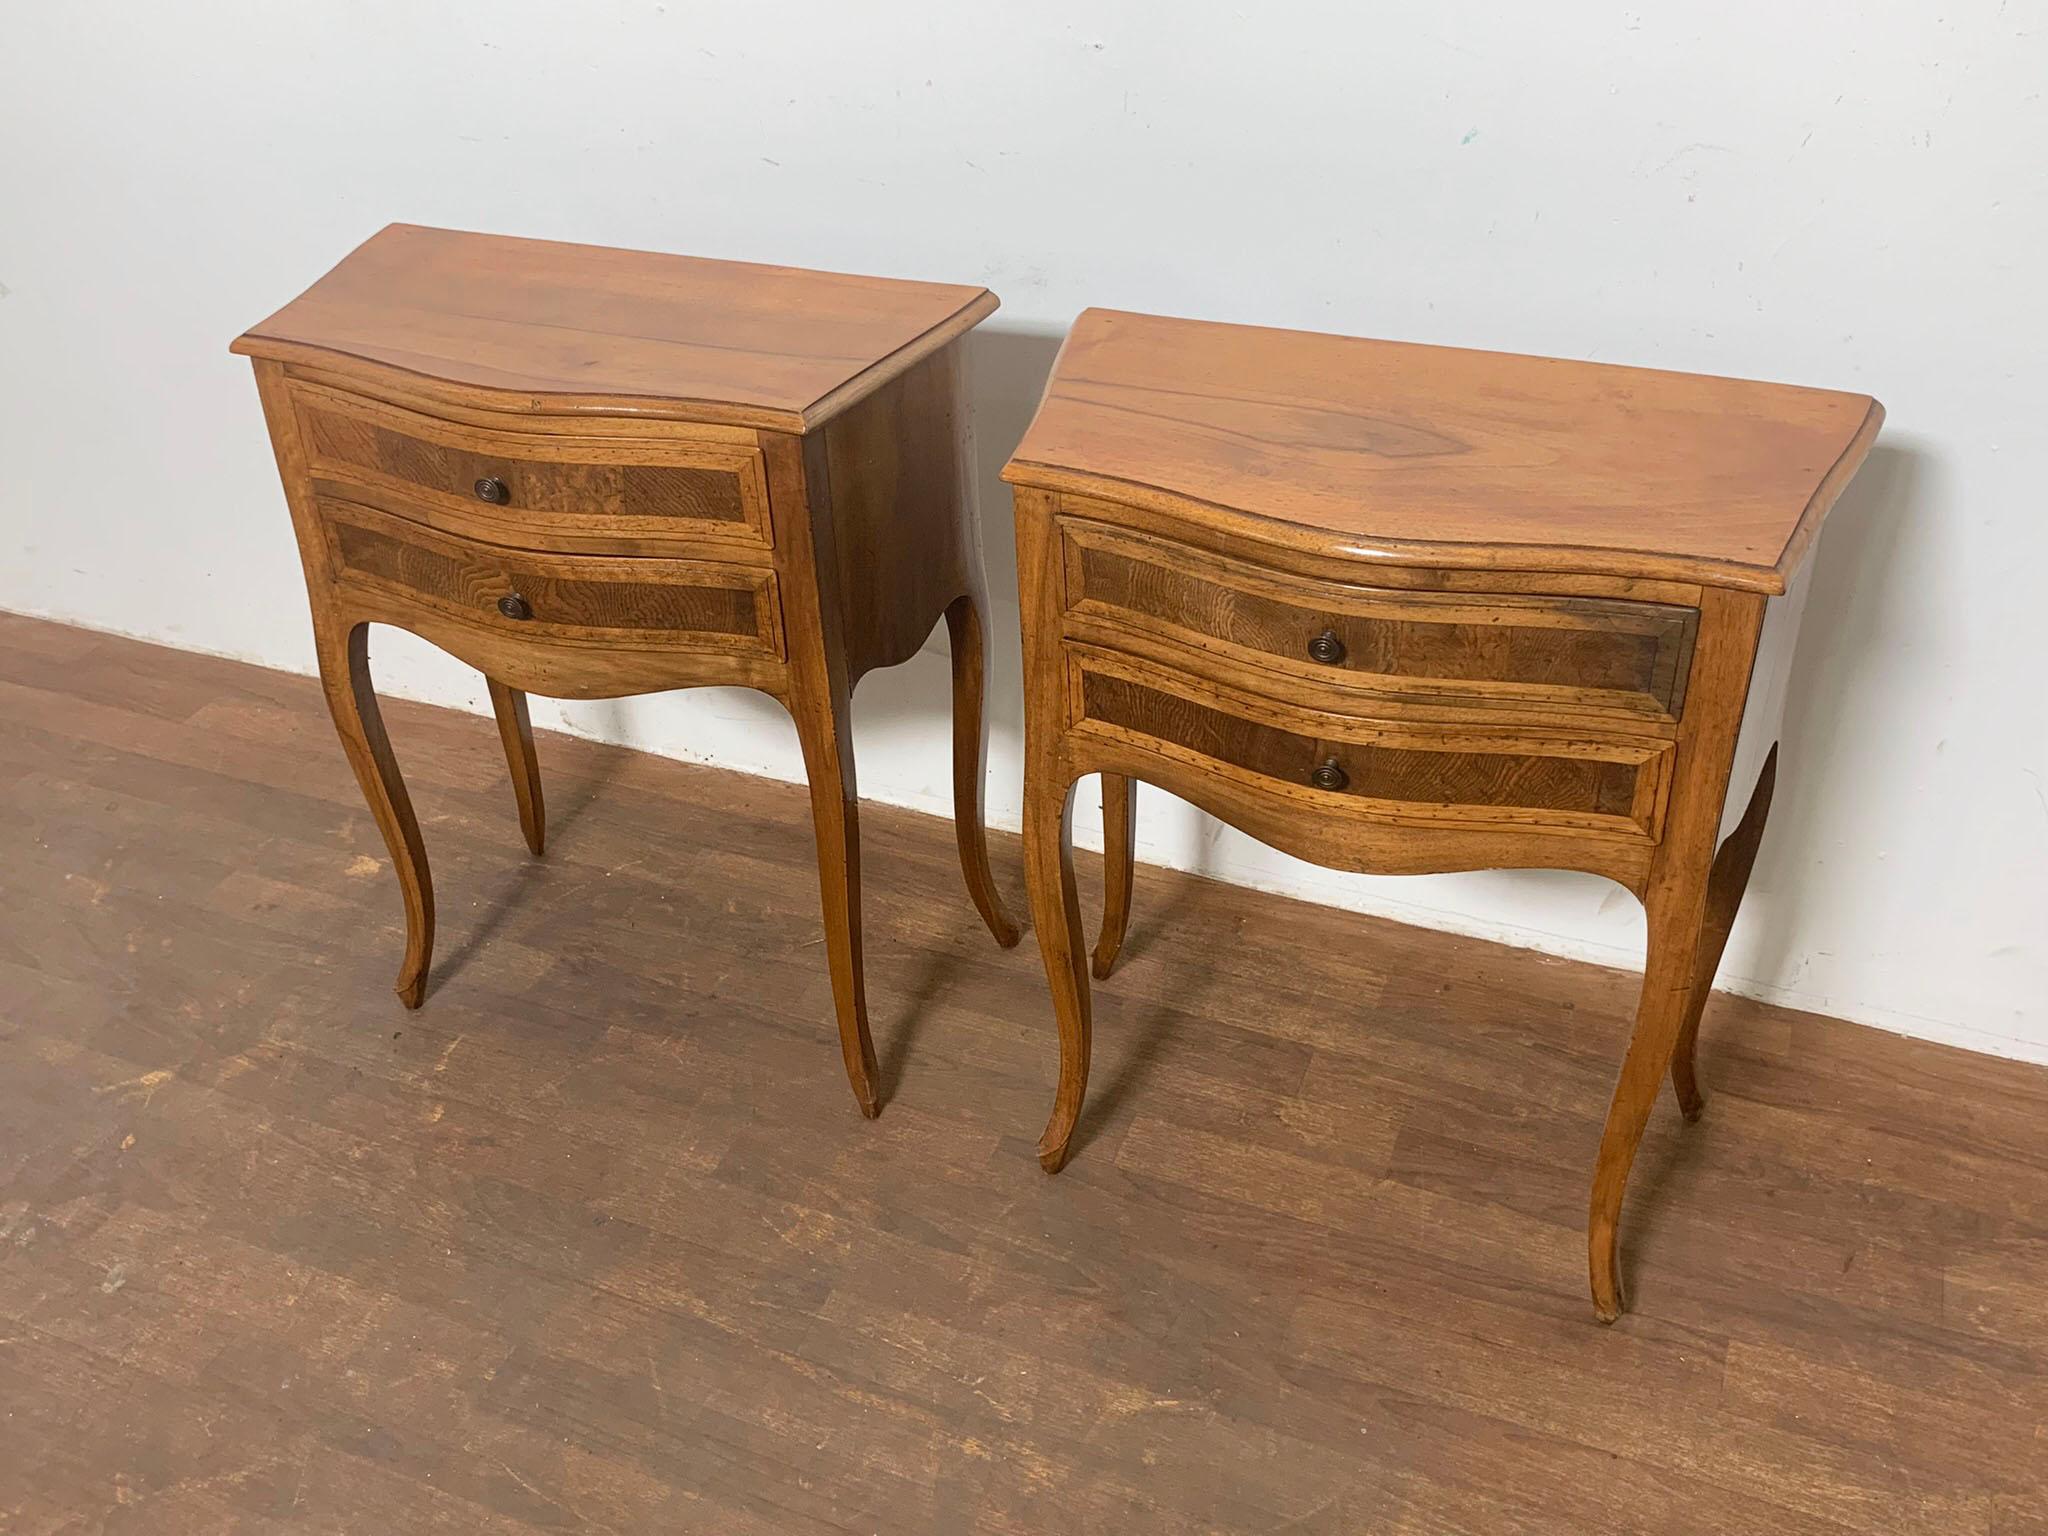 A pair of Louis XVI French Country style nightstands in walnut circa 1950s.